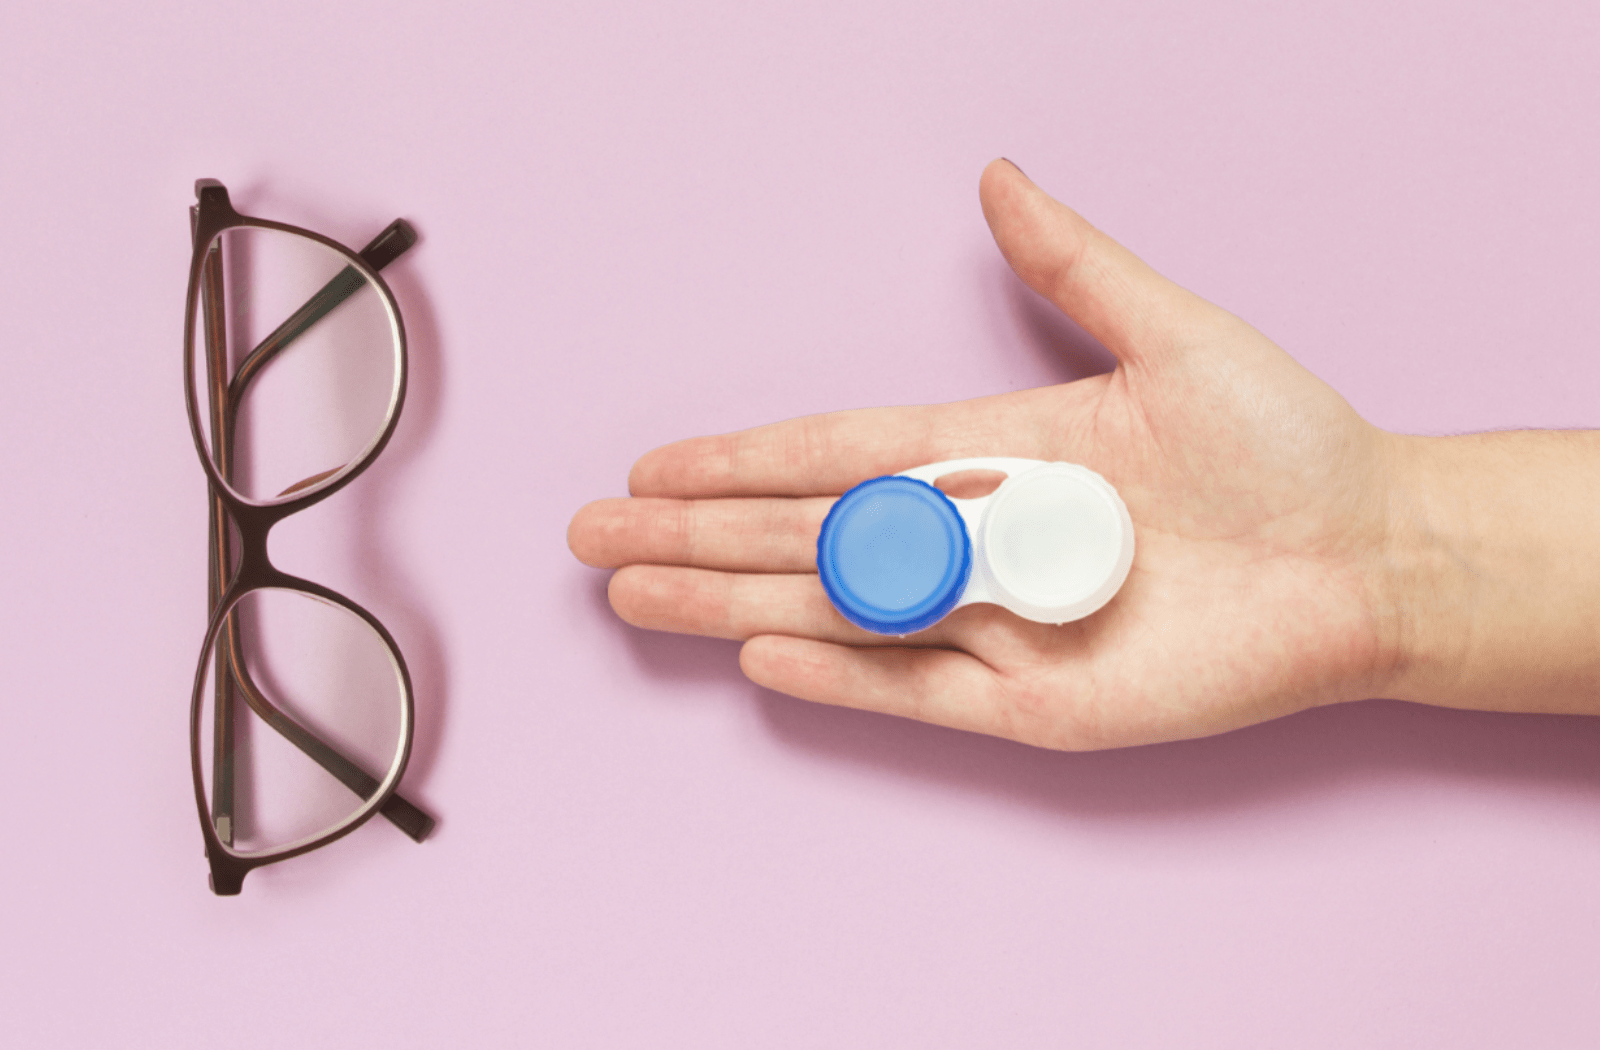 A pair of glasses sitting against a pink background, with someone holding their hand out with a contact lens case in the palm of their hand